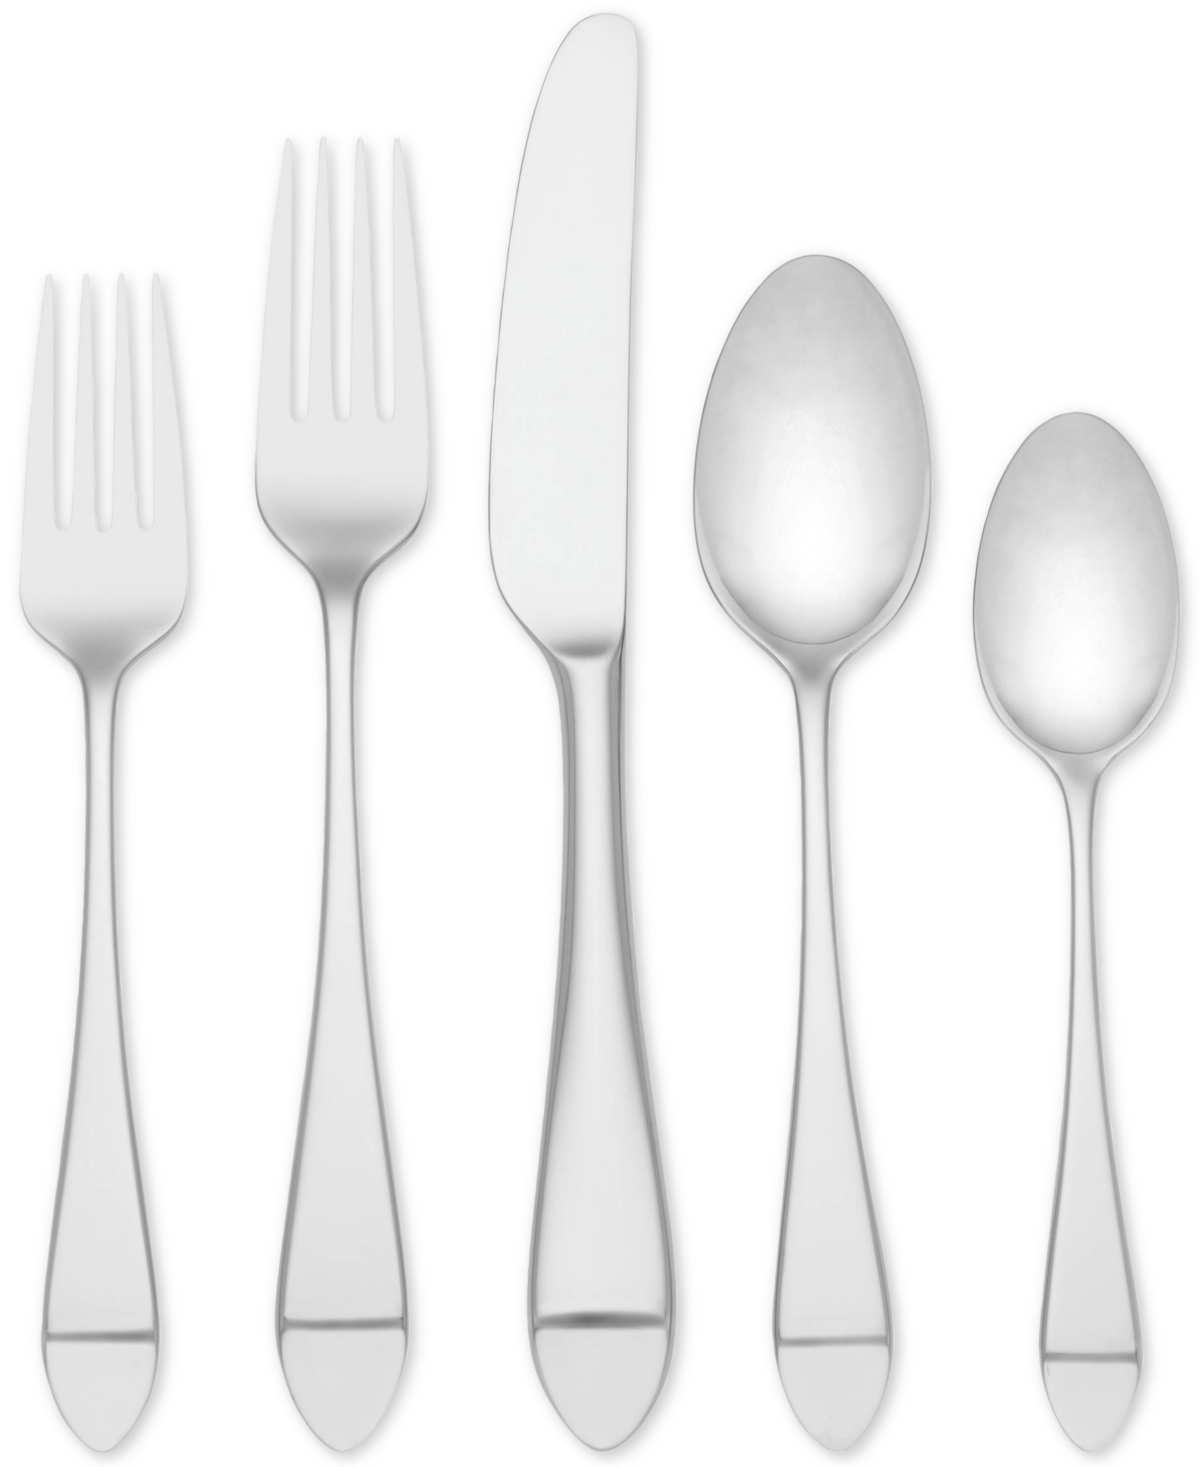 Kate Spade Charlotte Street 20 Piece Flatware Set, Service For 4 In Stainless